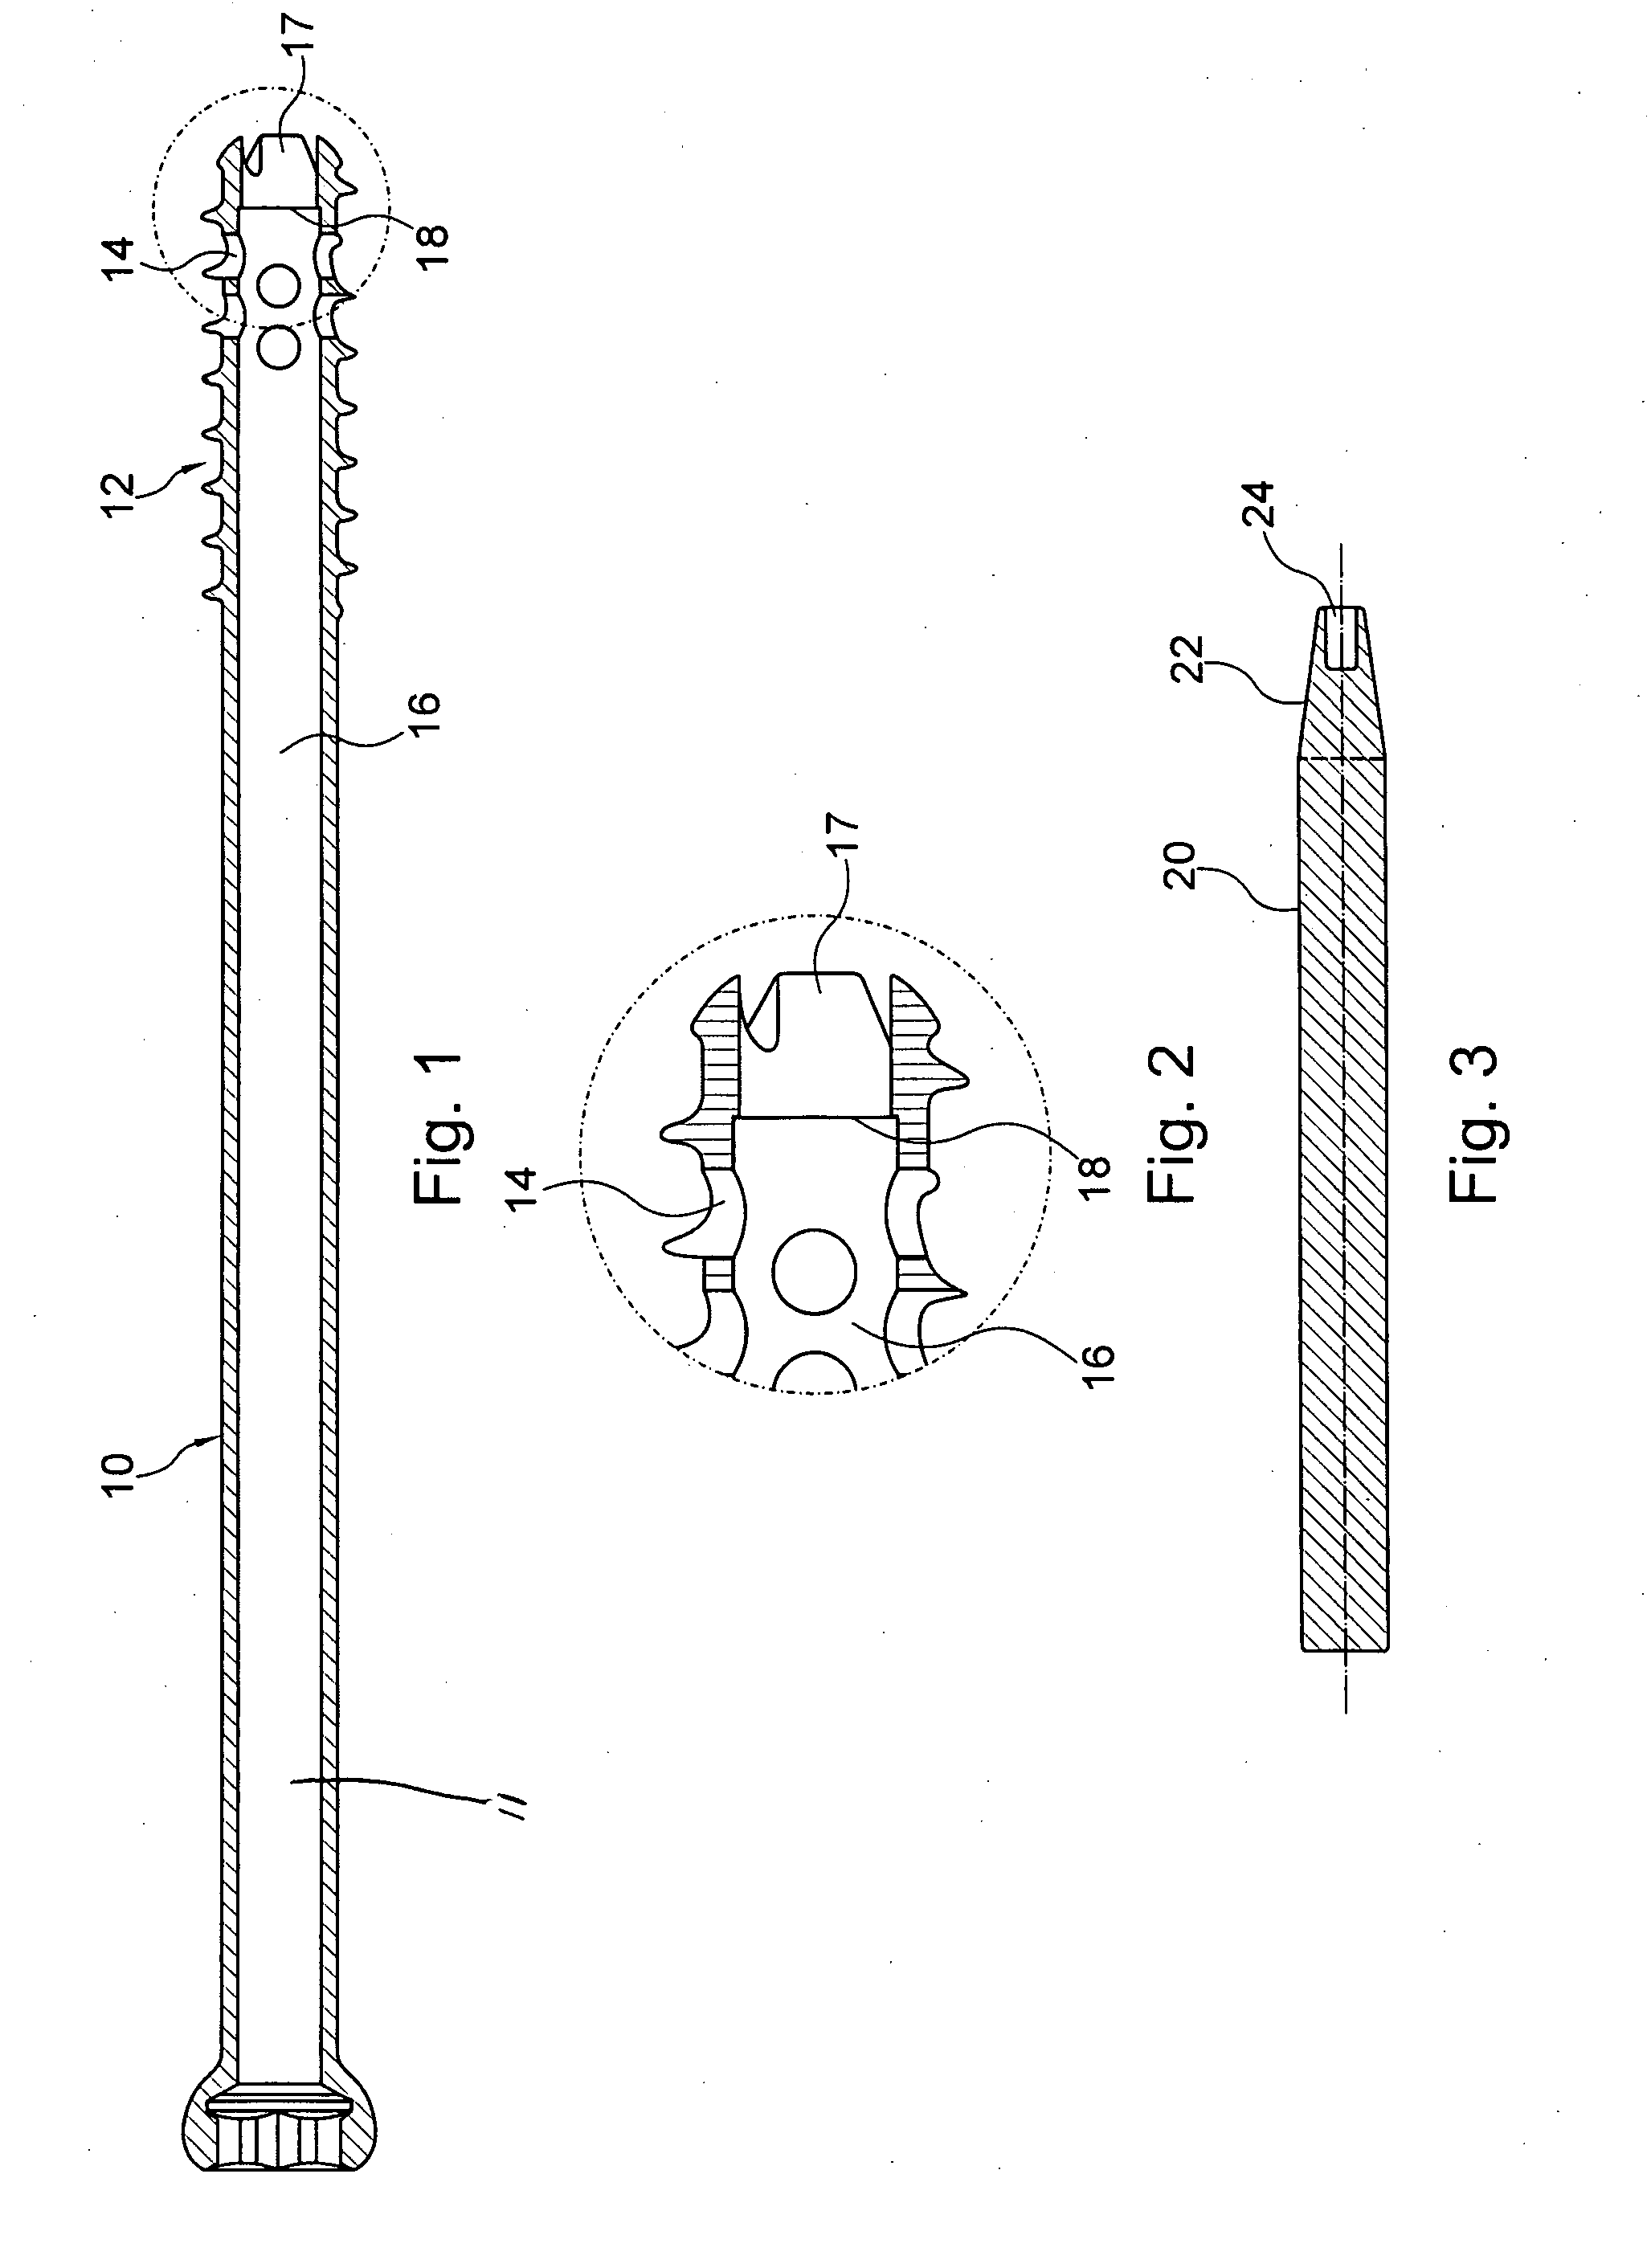 Device for fixation of bone fractures